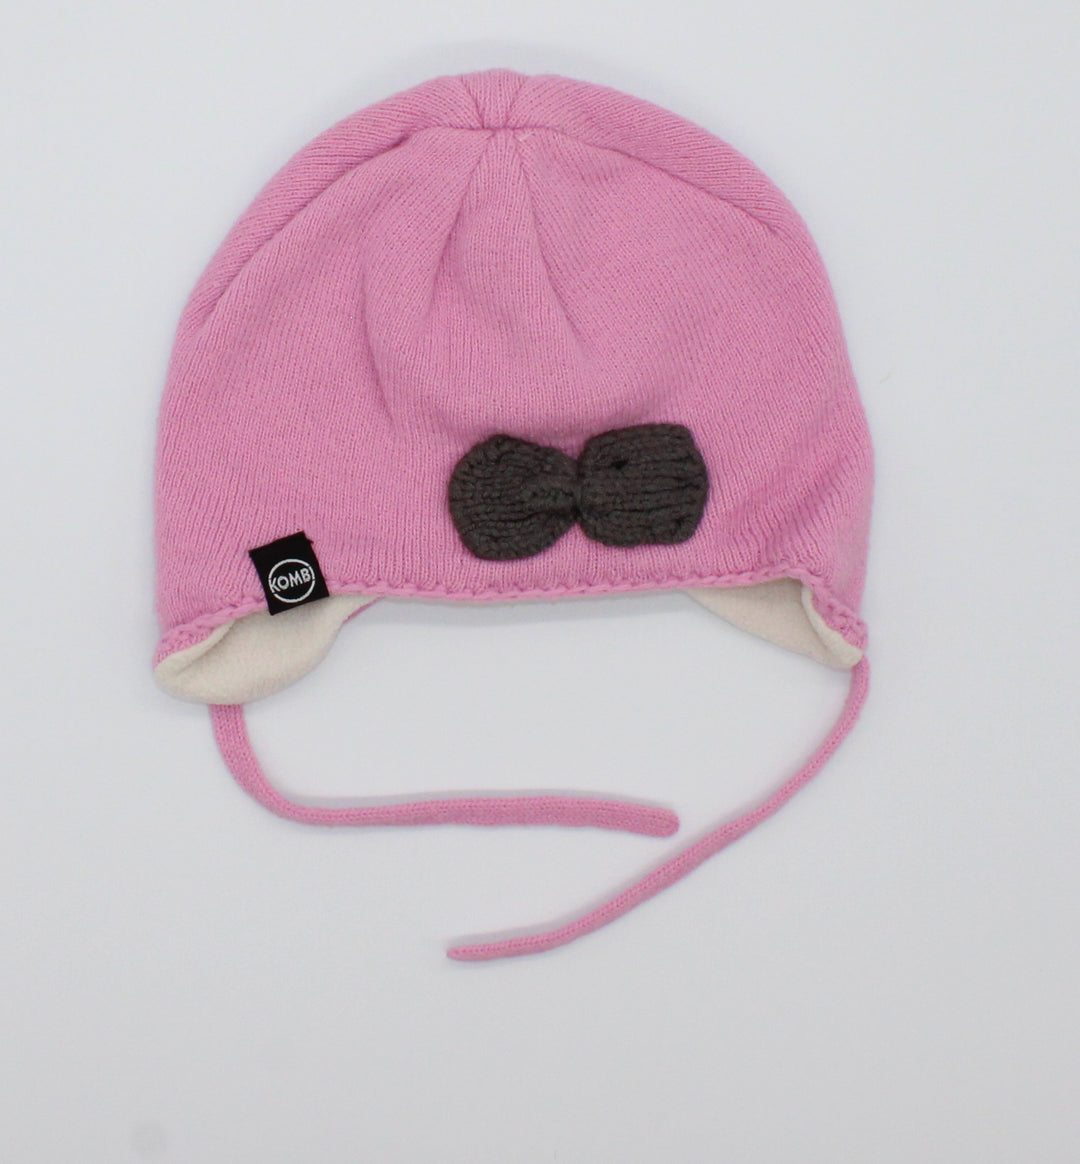 KOMBI PINK HAT 1 SIZE (APPROX 12M TO 3Y)